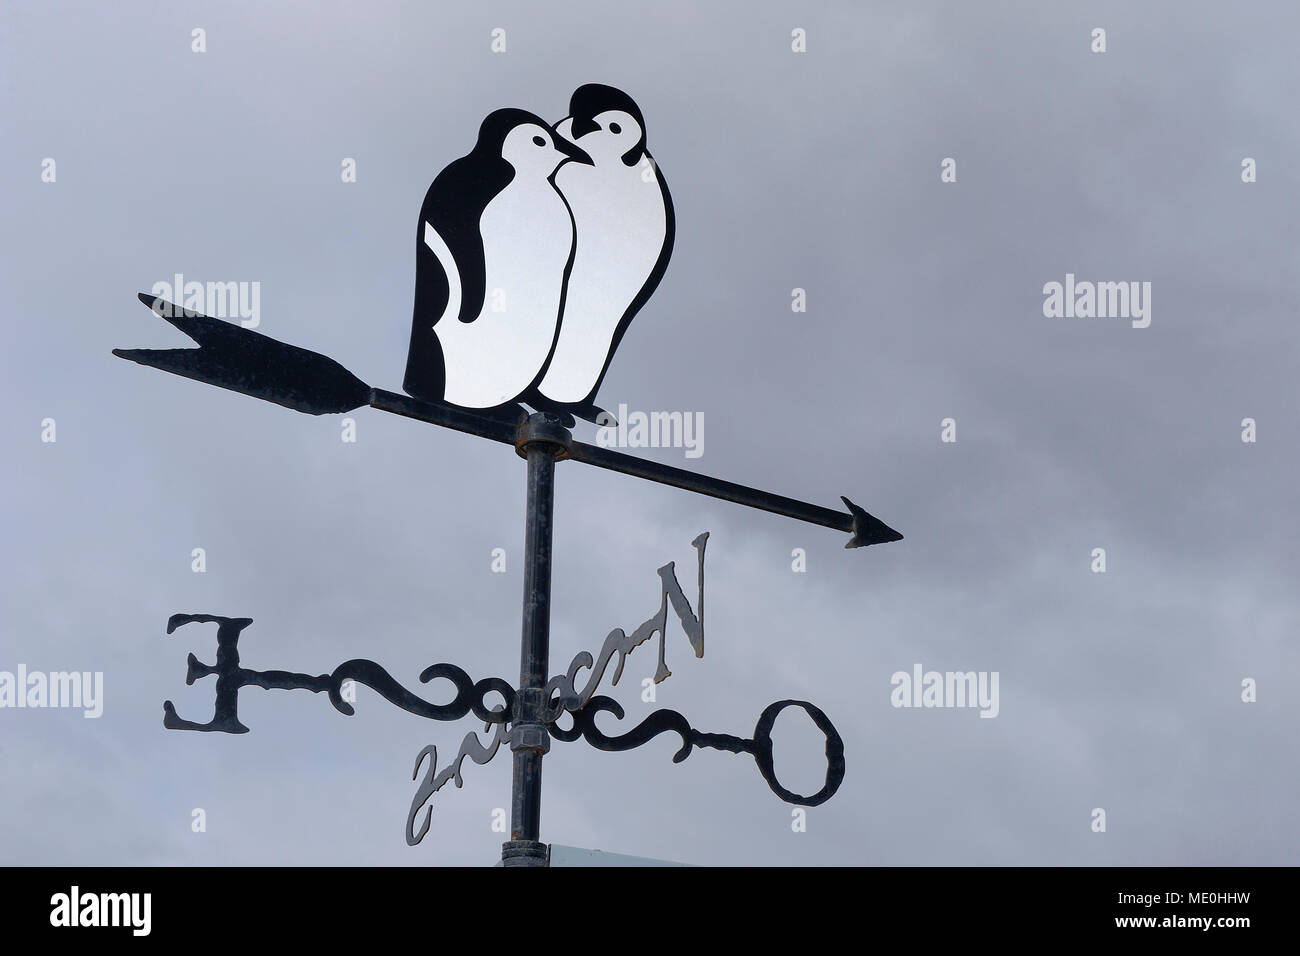 Close-up of a weather vane depicting penguins at Ushuaia in Tierra del Fuego, Argentina Stock Photo